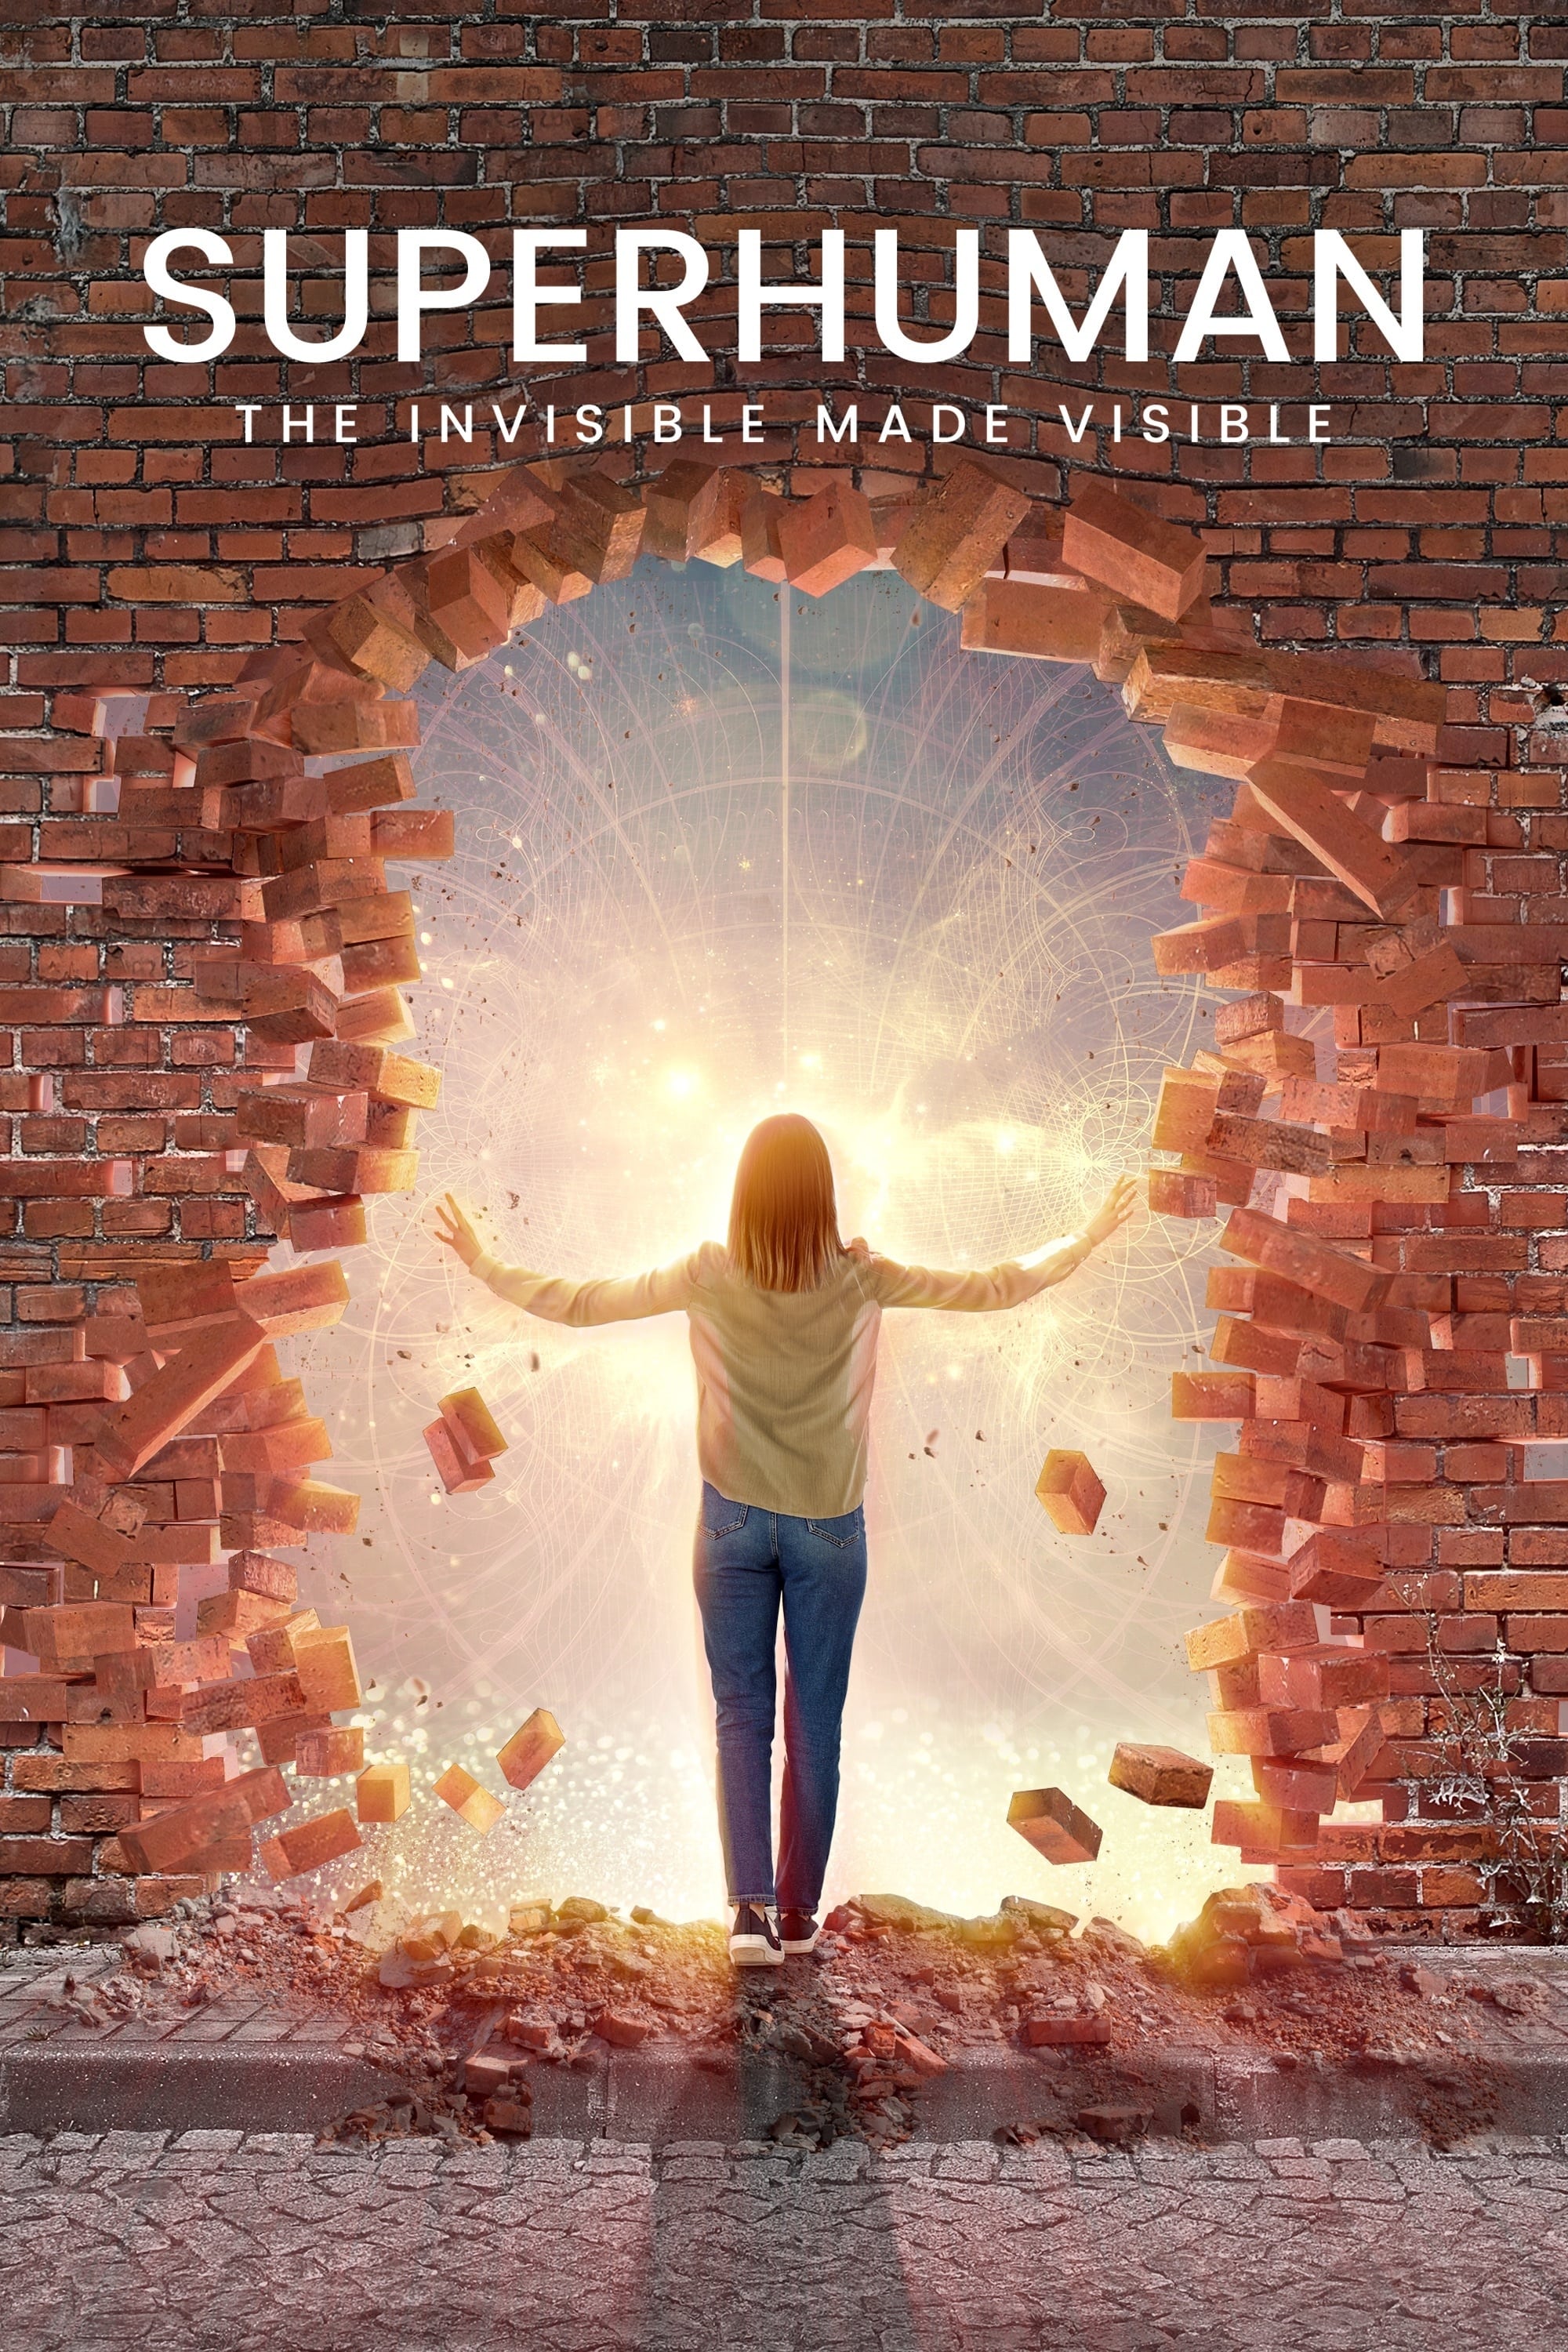 Superhuman: The Invisible Made Visible (2020)